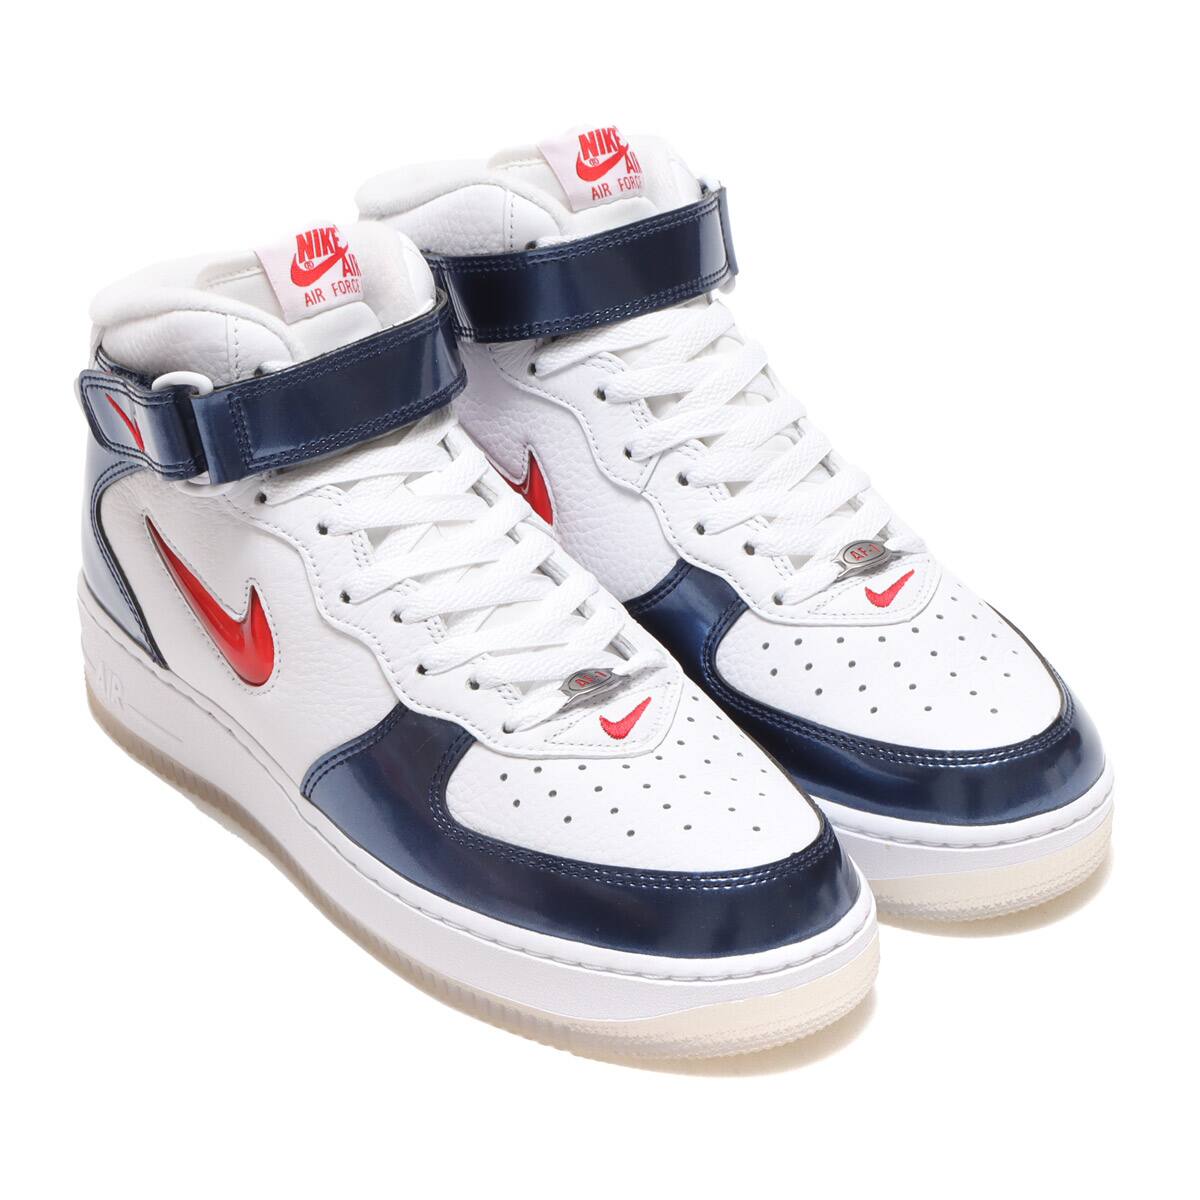 NIKE AIR FORCE 1 MID QS WHITE/UNIVERSITY RED-MIDNIGHT NAVY-WHITE